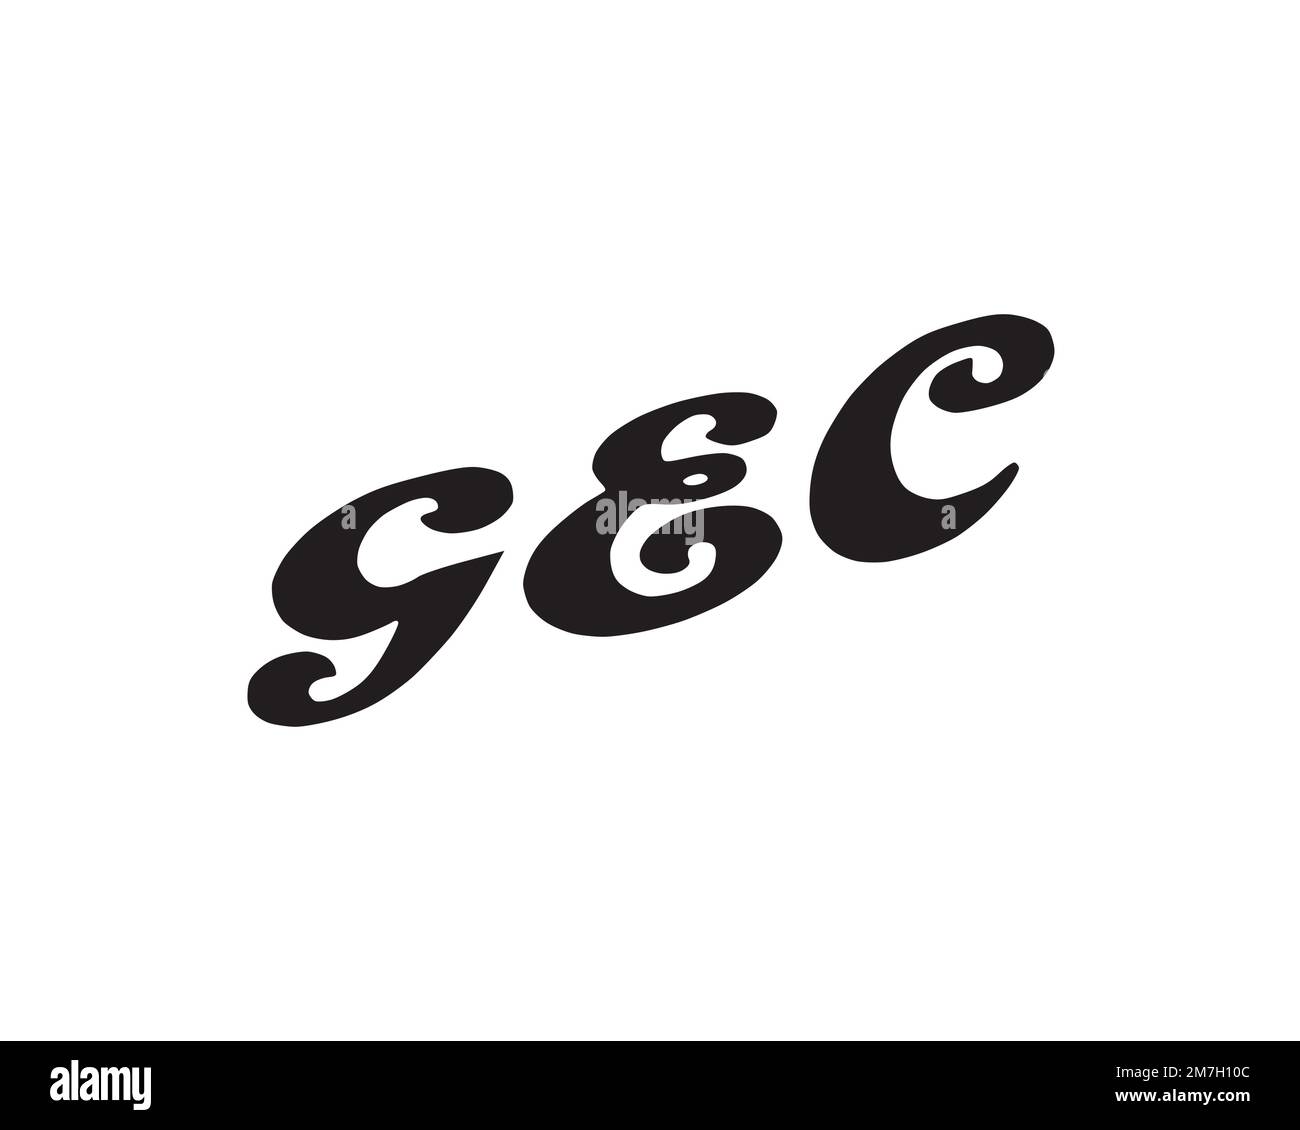 General Electric Company, rotated logo, white background Stock Photo